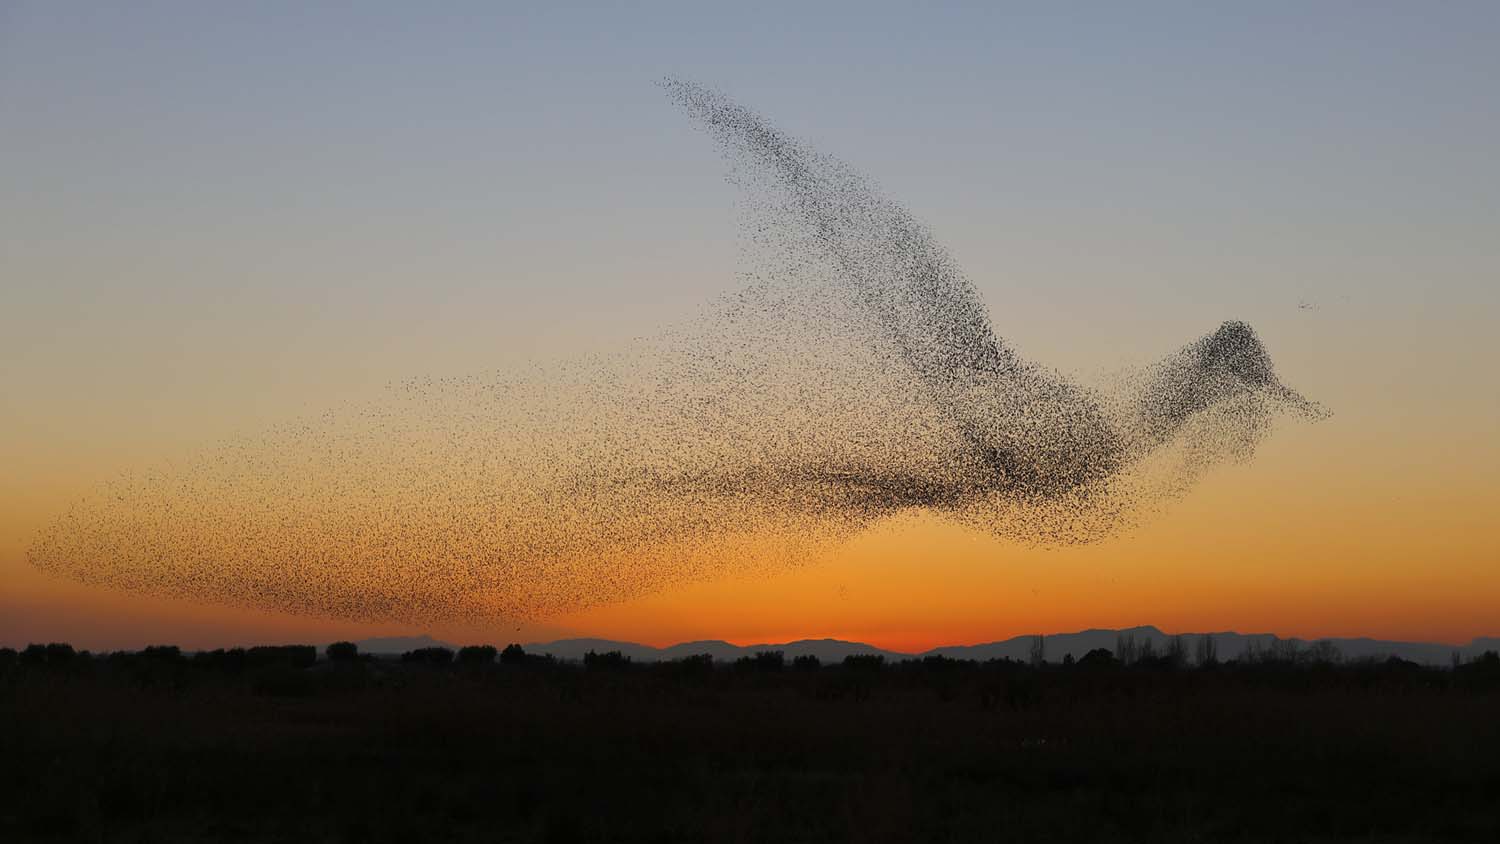 These are most amazing photos of starling murmurations | World Photography Organisation